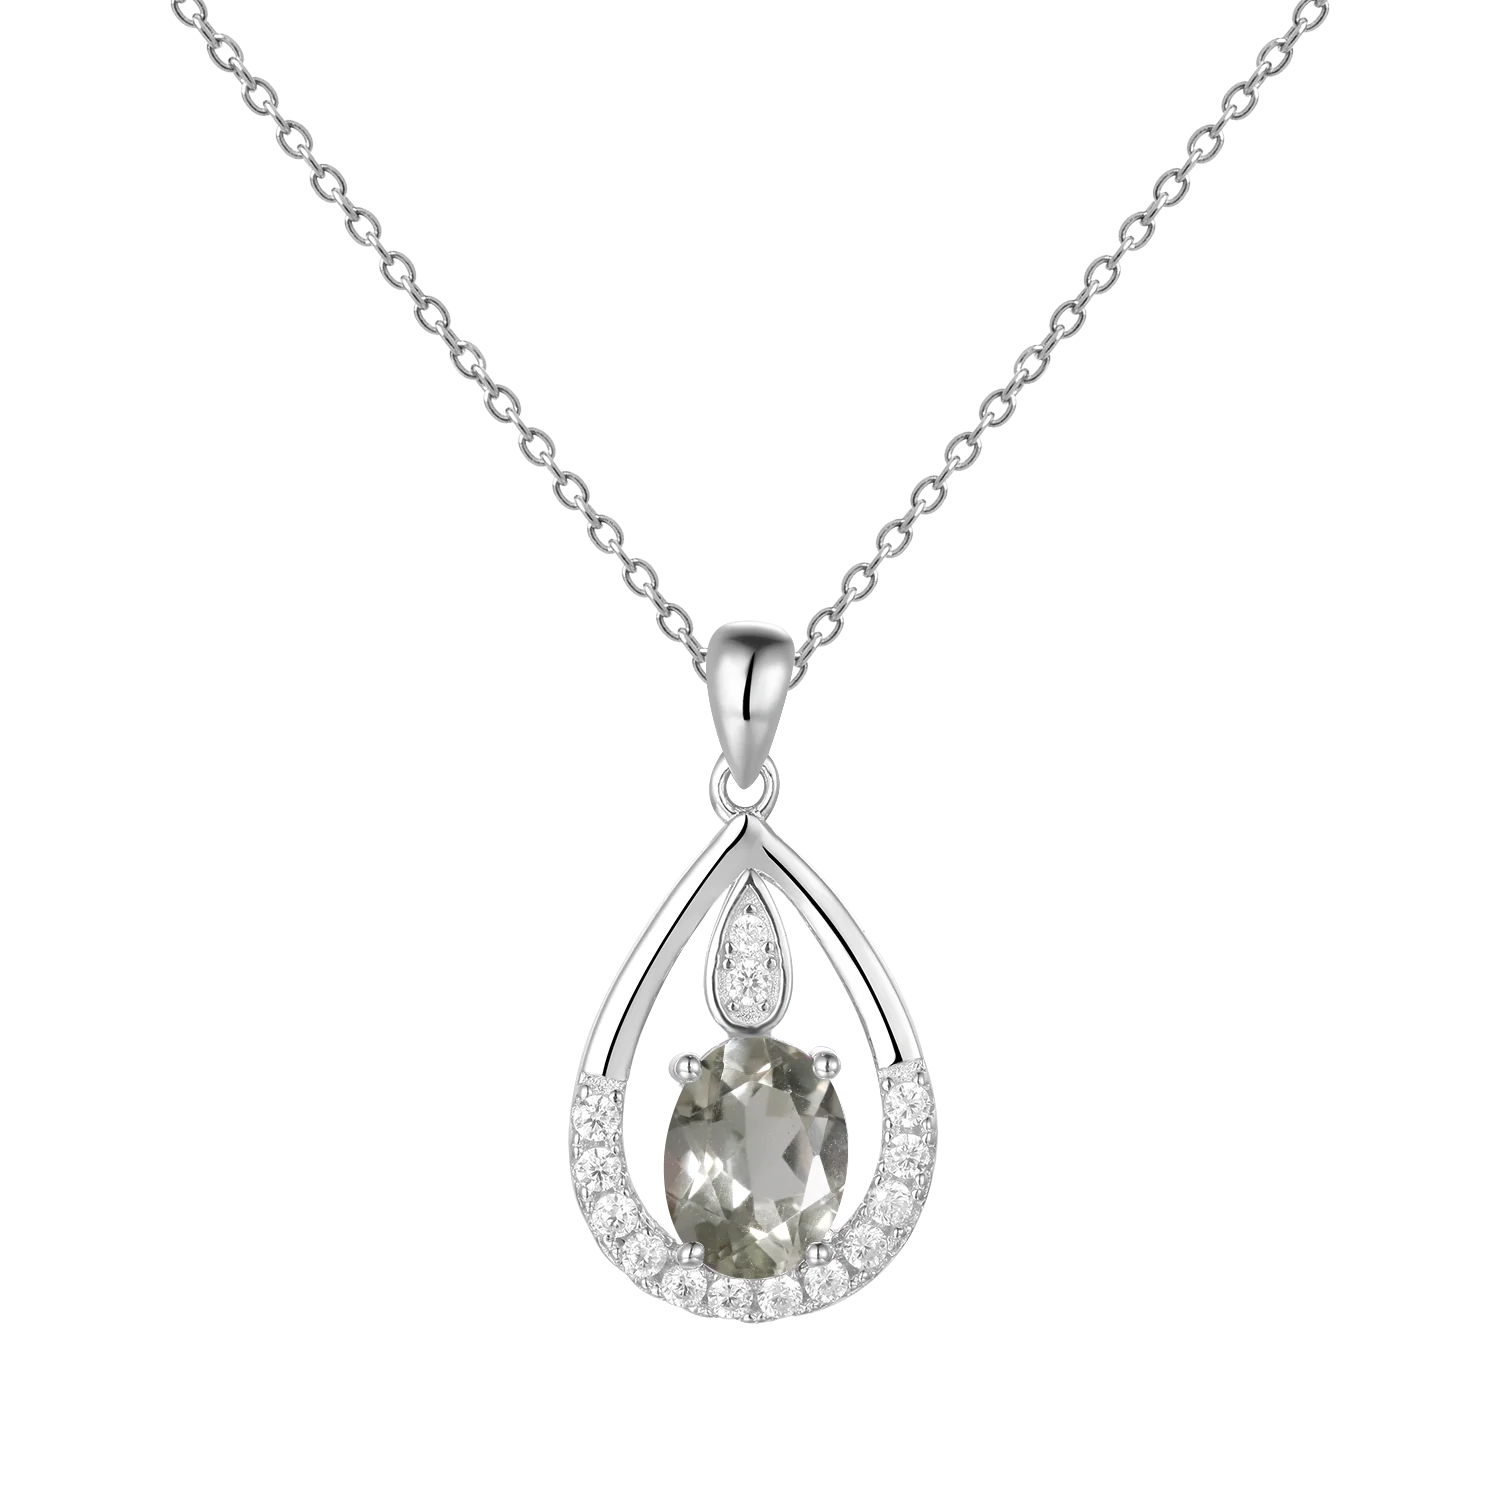 Gem's Ballet December Birthstone Topaz Necklace 6x8mm Oval Pink Topaz Pendant Necklace in 925 Sterling Silver with 18" Chain Green Amethyst